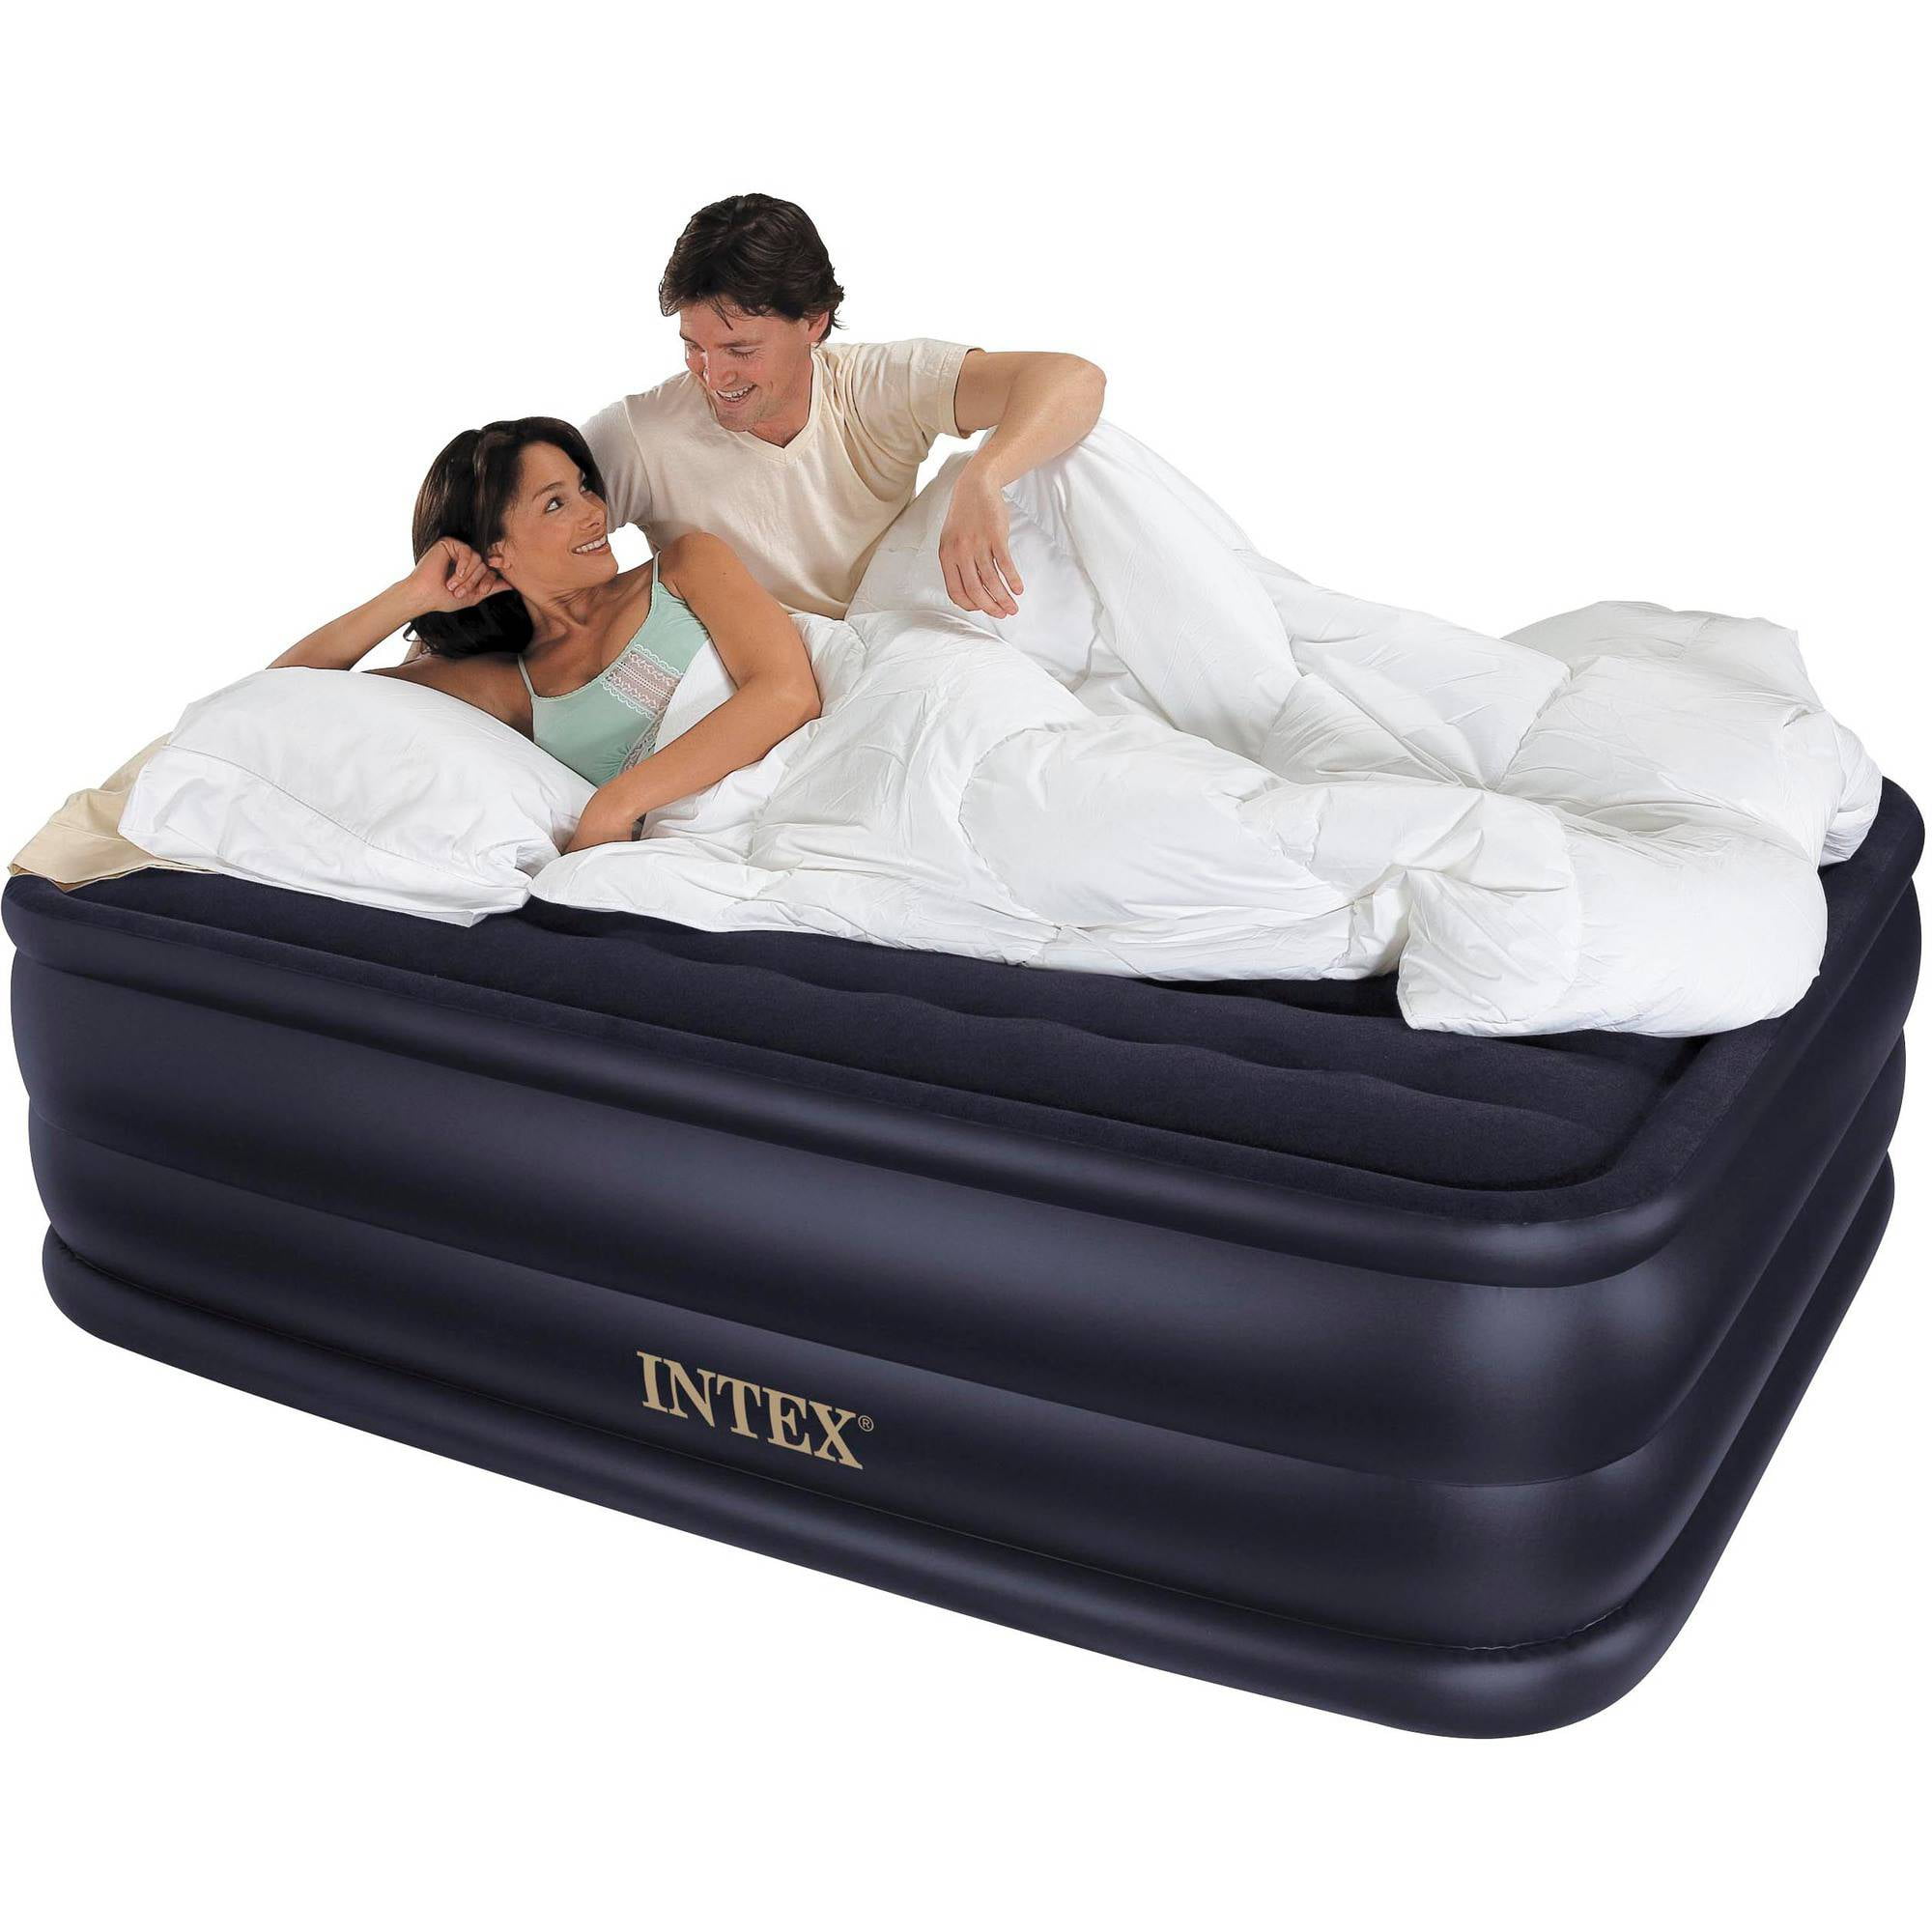 Double air Mattress with Built-in air Pump Portable air Mattress Bed 19 inch high Double air Bed-Queen Size